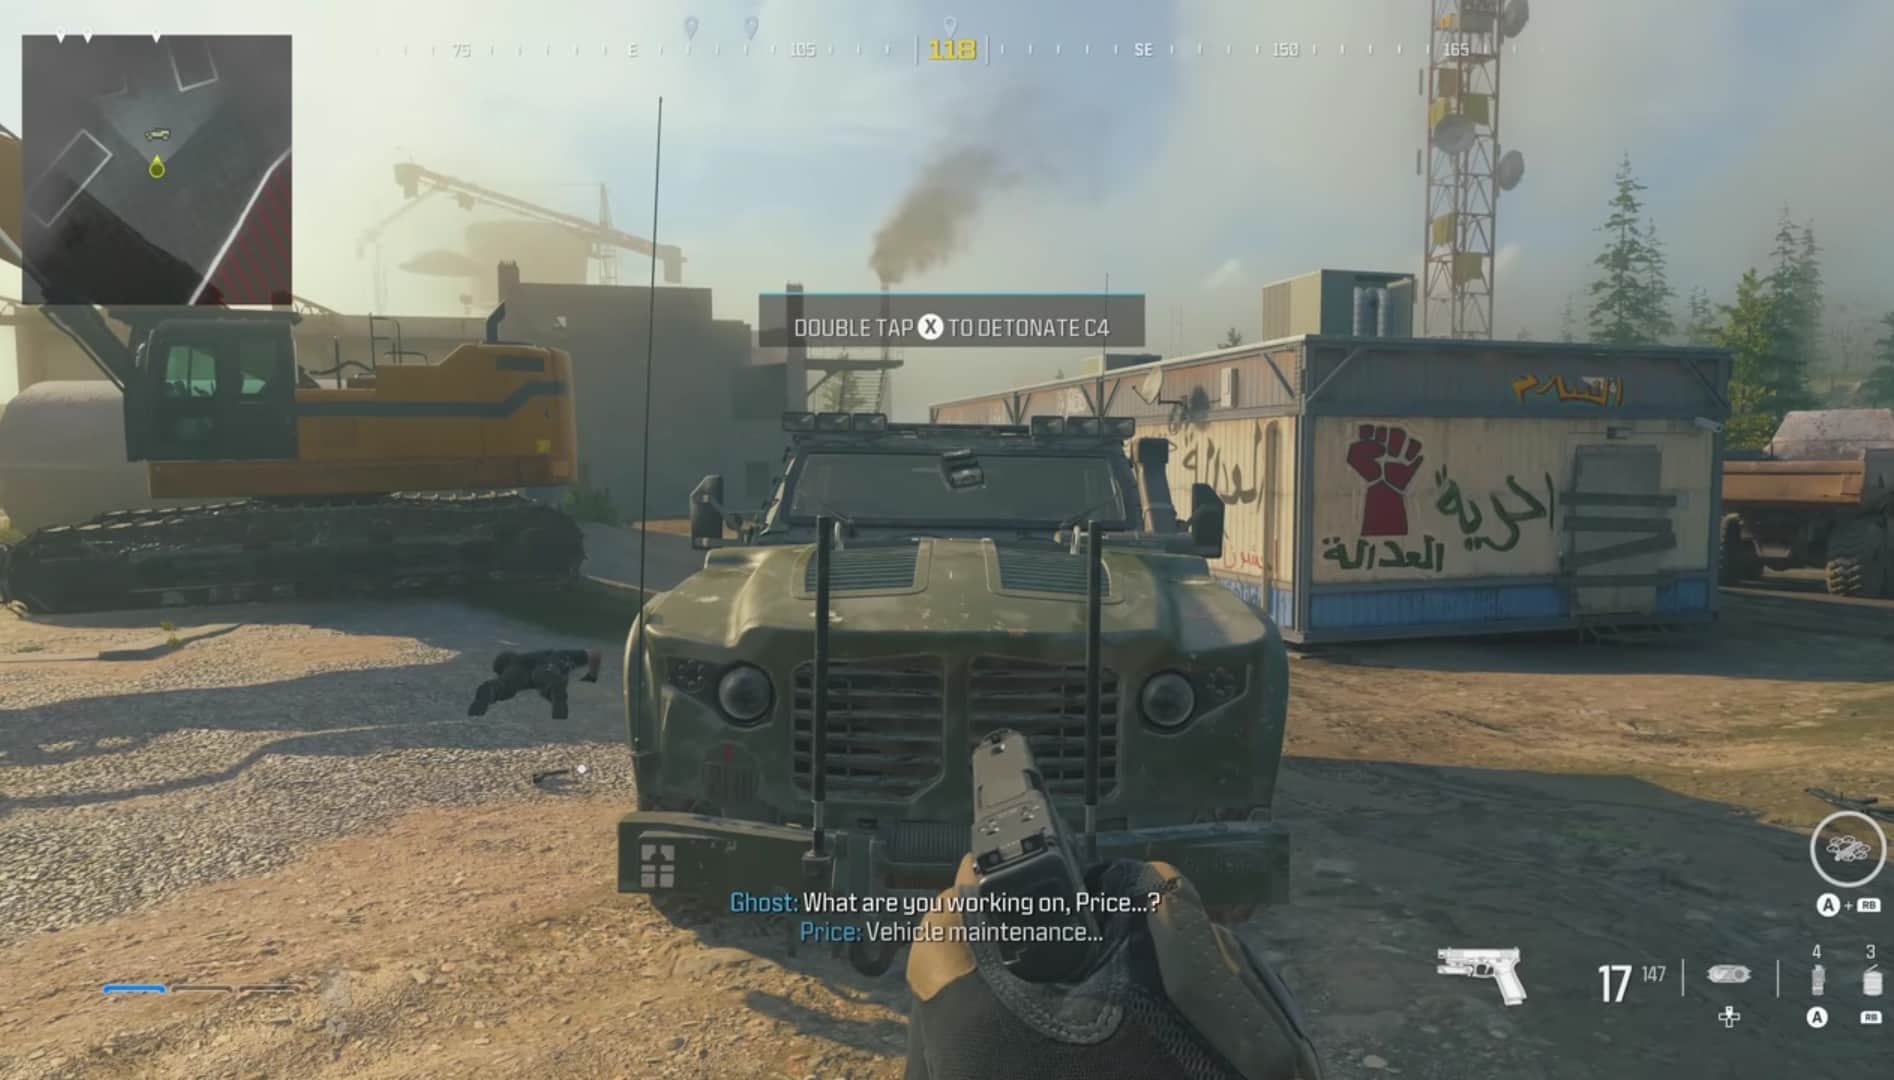 A screenshot of call of duty black ops 2 showcasing hidden details and campaign Easter eggs.